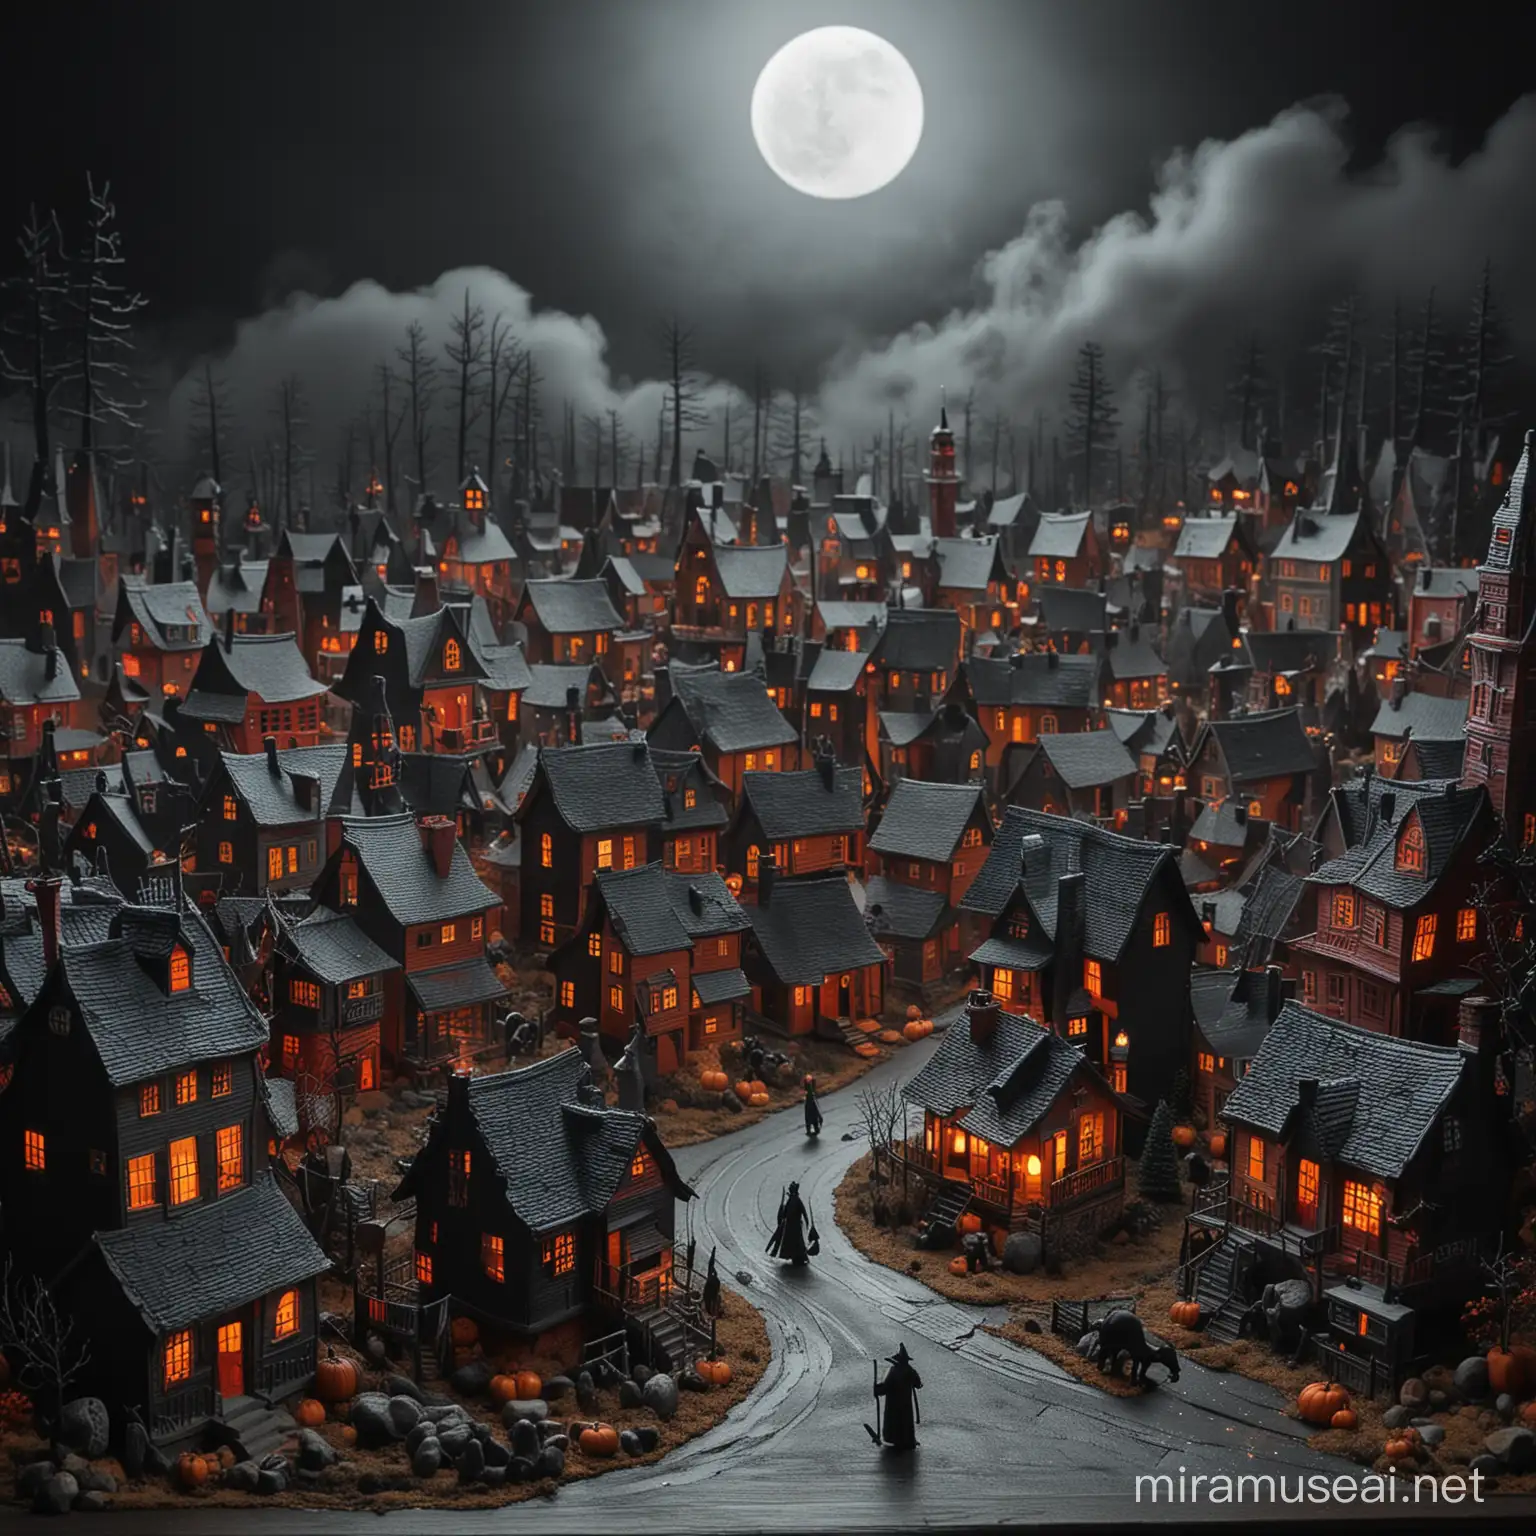 my little multidimensional diorama evil town, black cats, witches on brooms, tall skinny pumpkin men and white ghosts floating everywhere. Every house and building is of odd shapes and roofs are all colored black with red chimneys. Backdrop is an evil forest with a wicked moon and ly lying fog, brrrr it is cold outside and really spooky